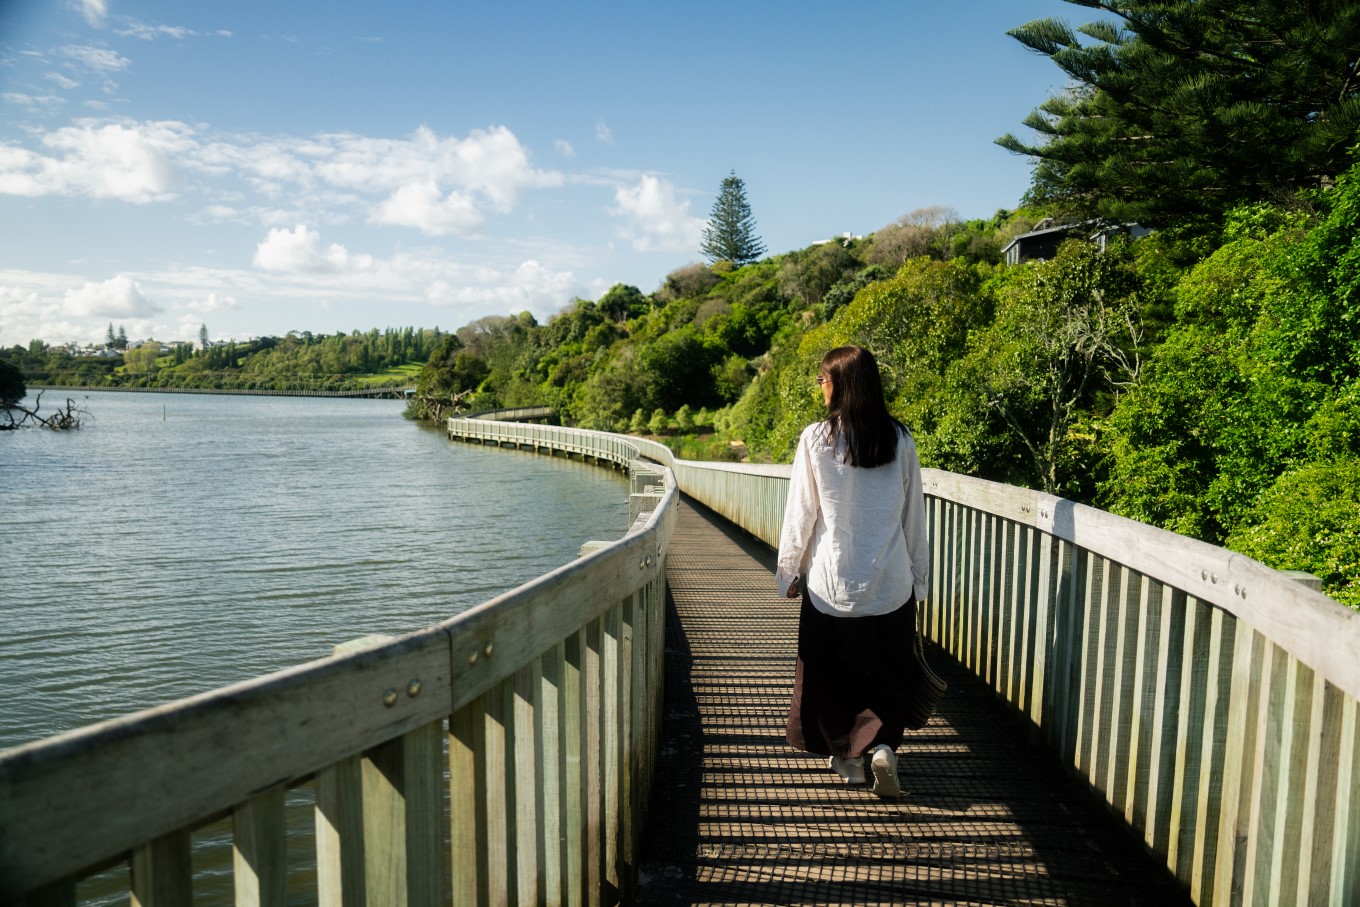 The Ōrākei Basin Path is a 45-minute walk that features a magnificent boardwalk section.